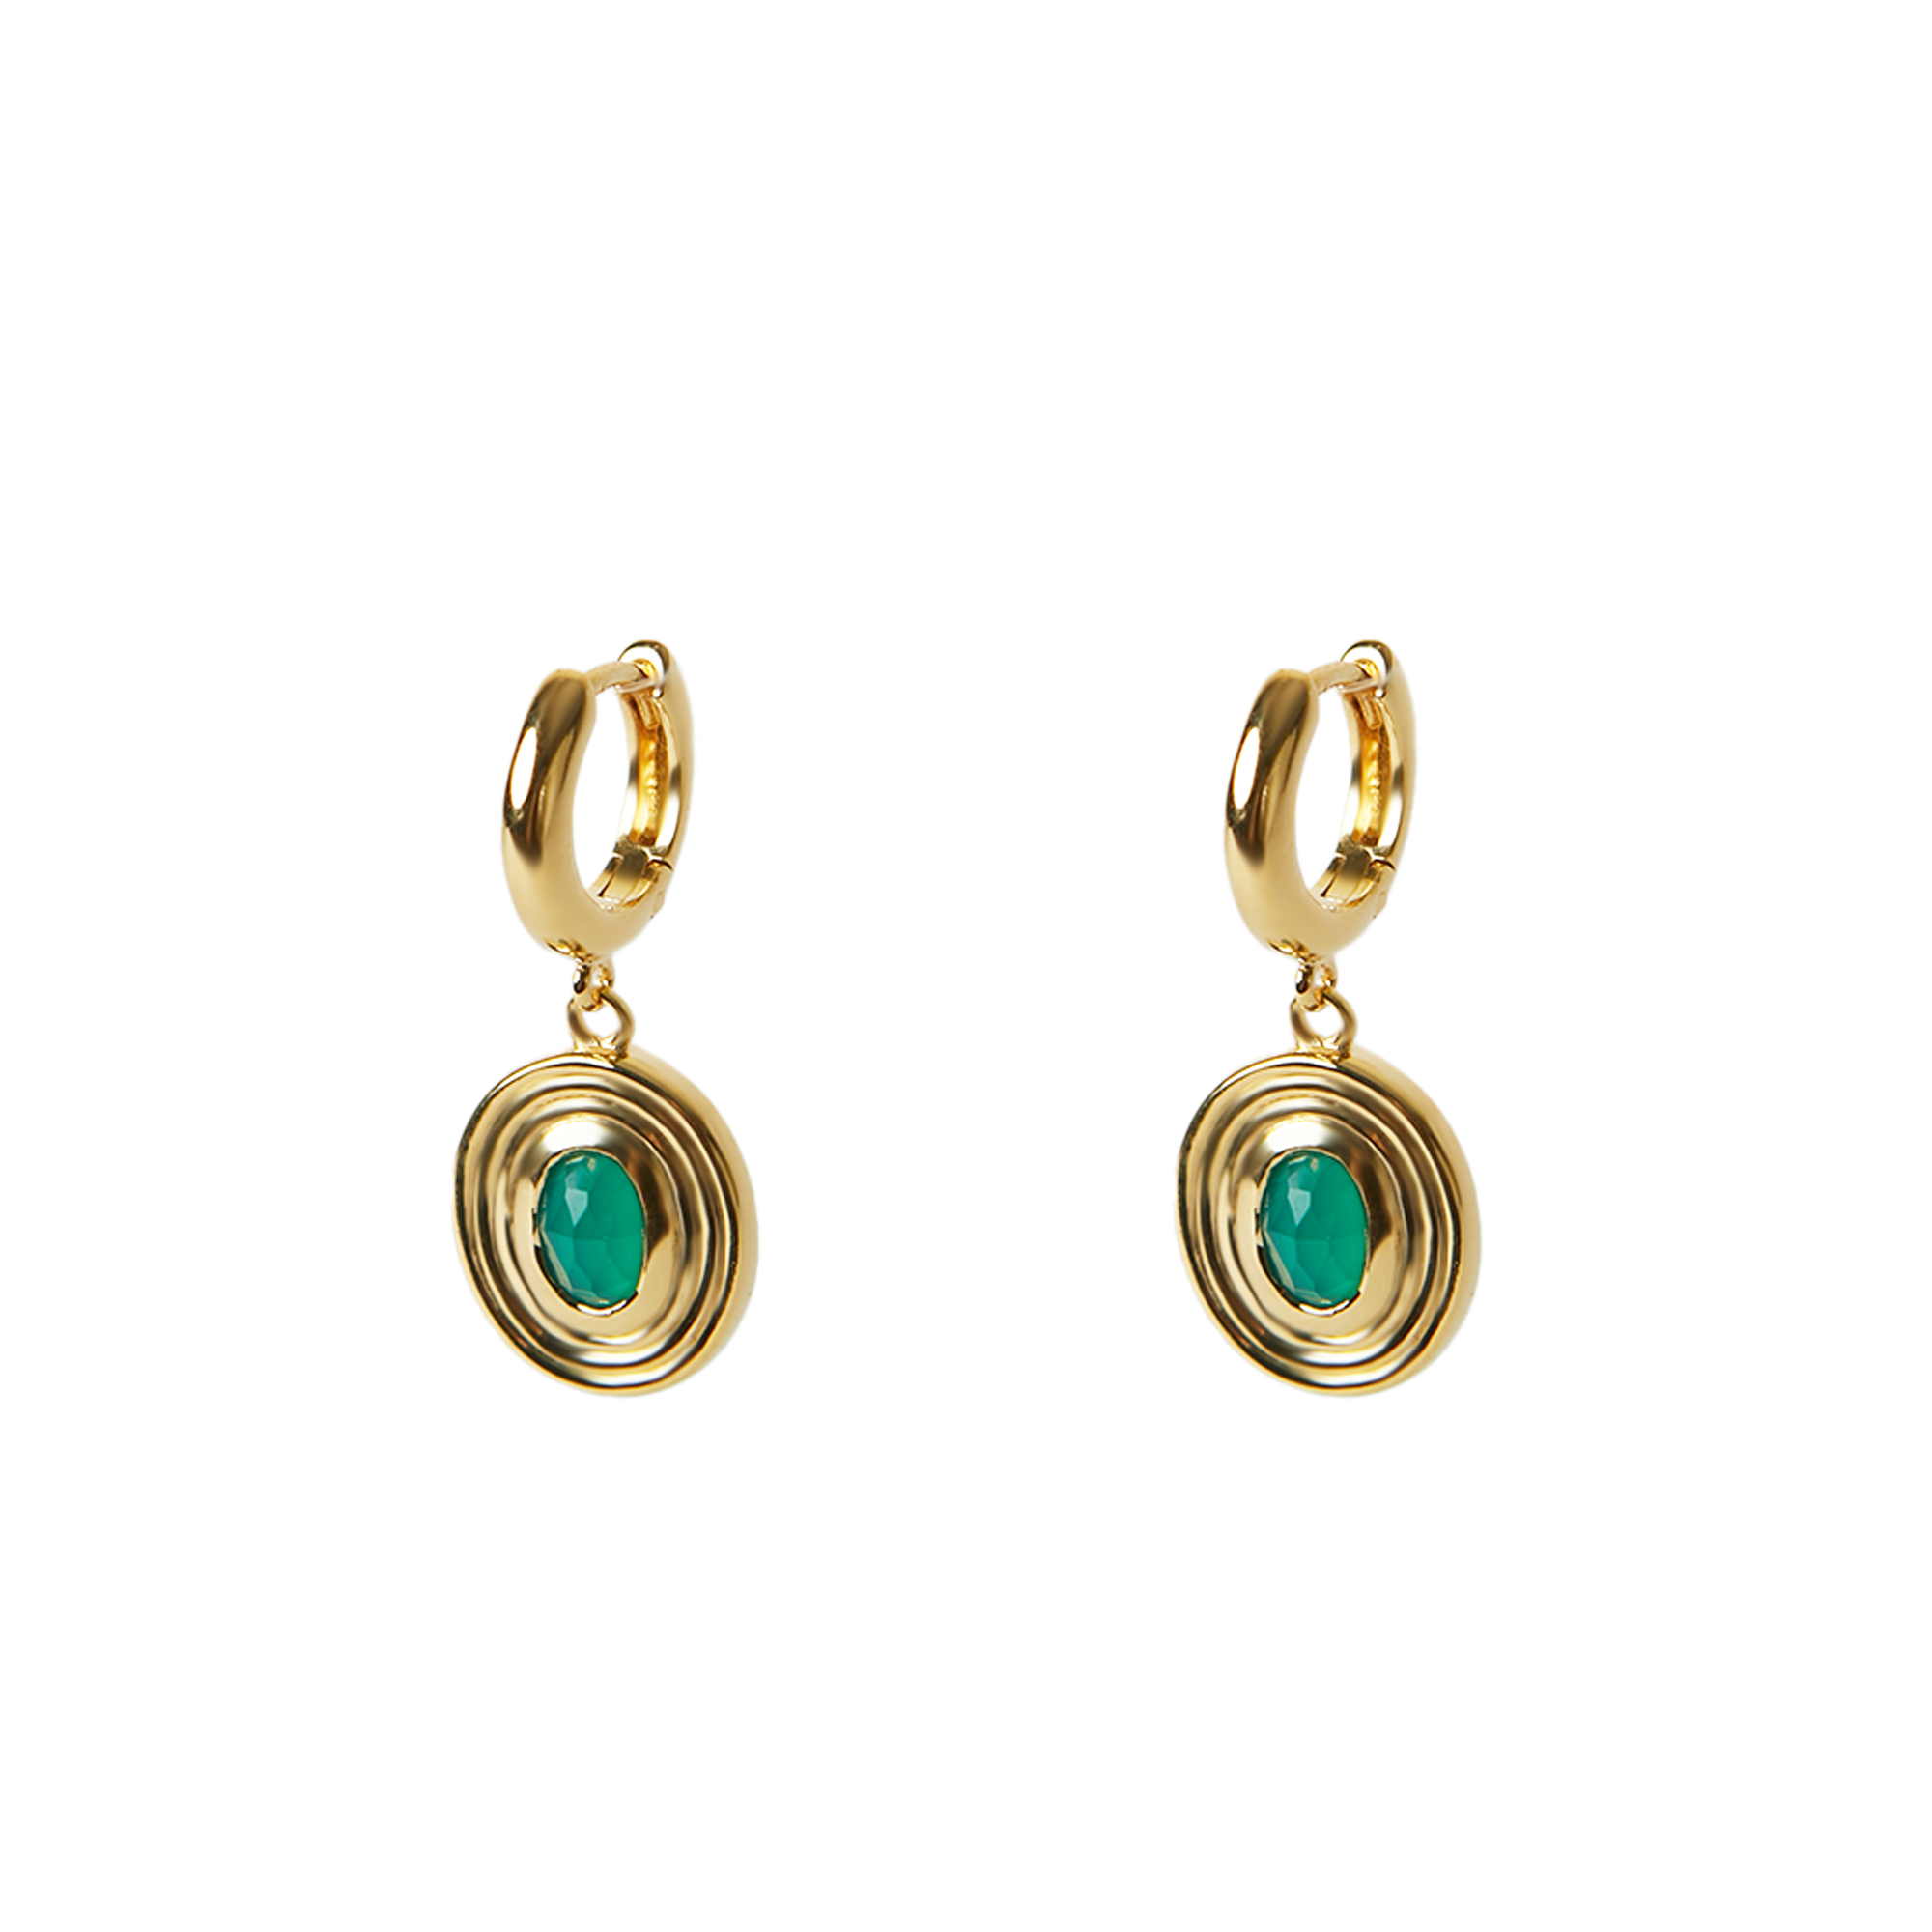 THE GREEN AGATE OVAL DROP EARRING